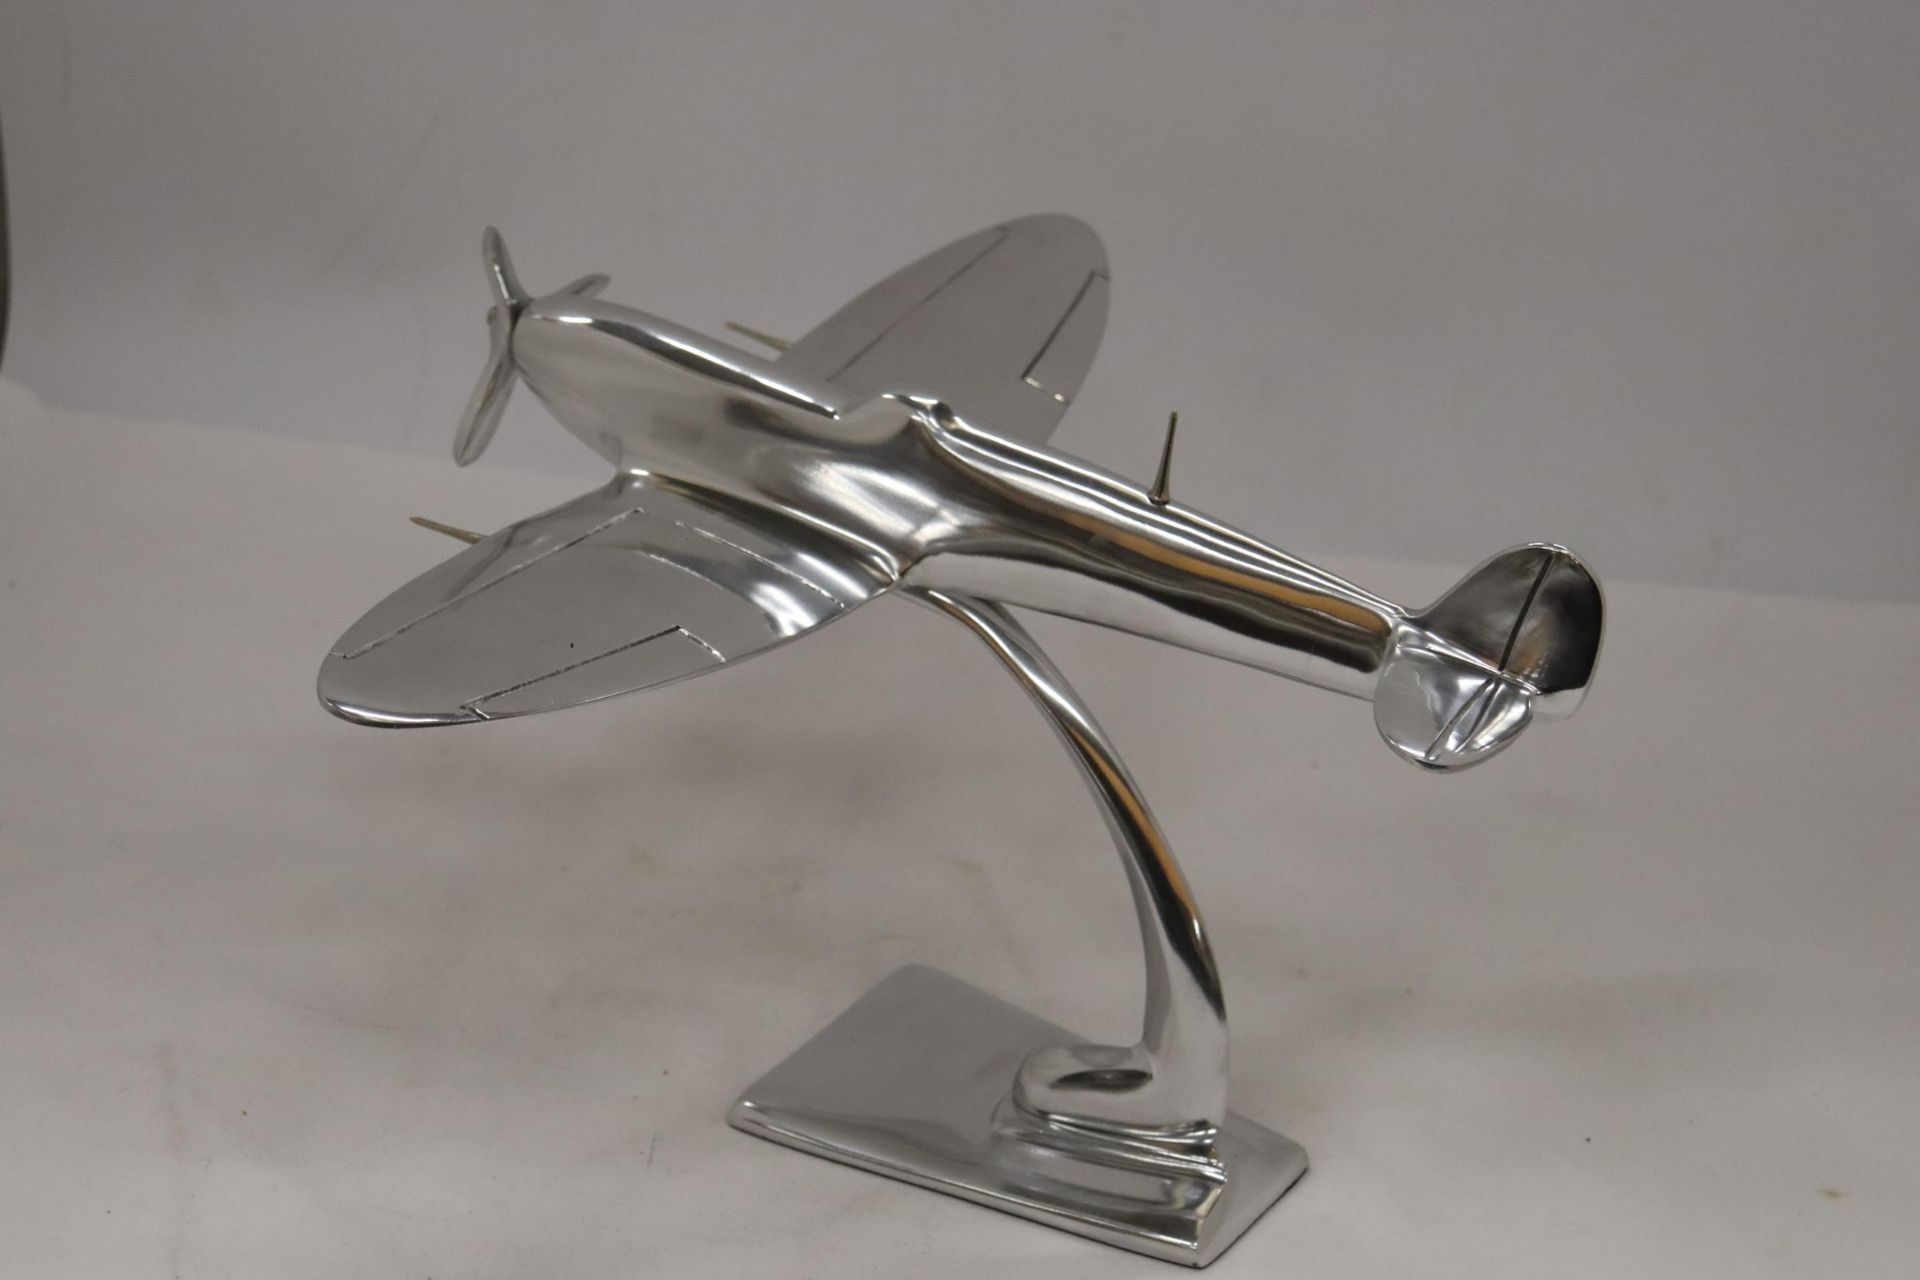 A LARGE CHROME SPITFIRE ON A STAND